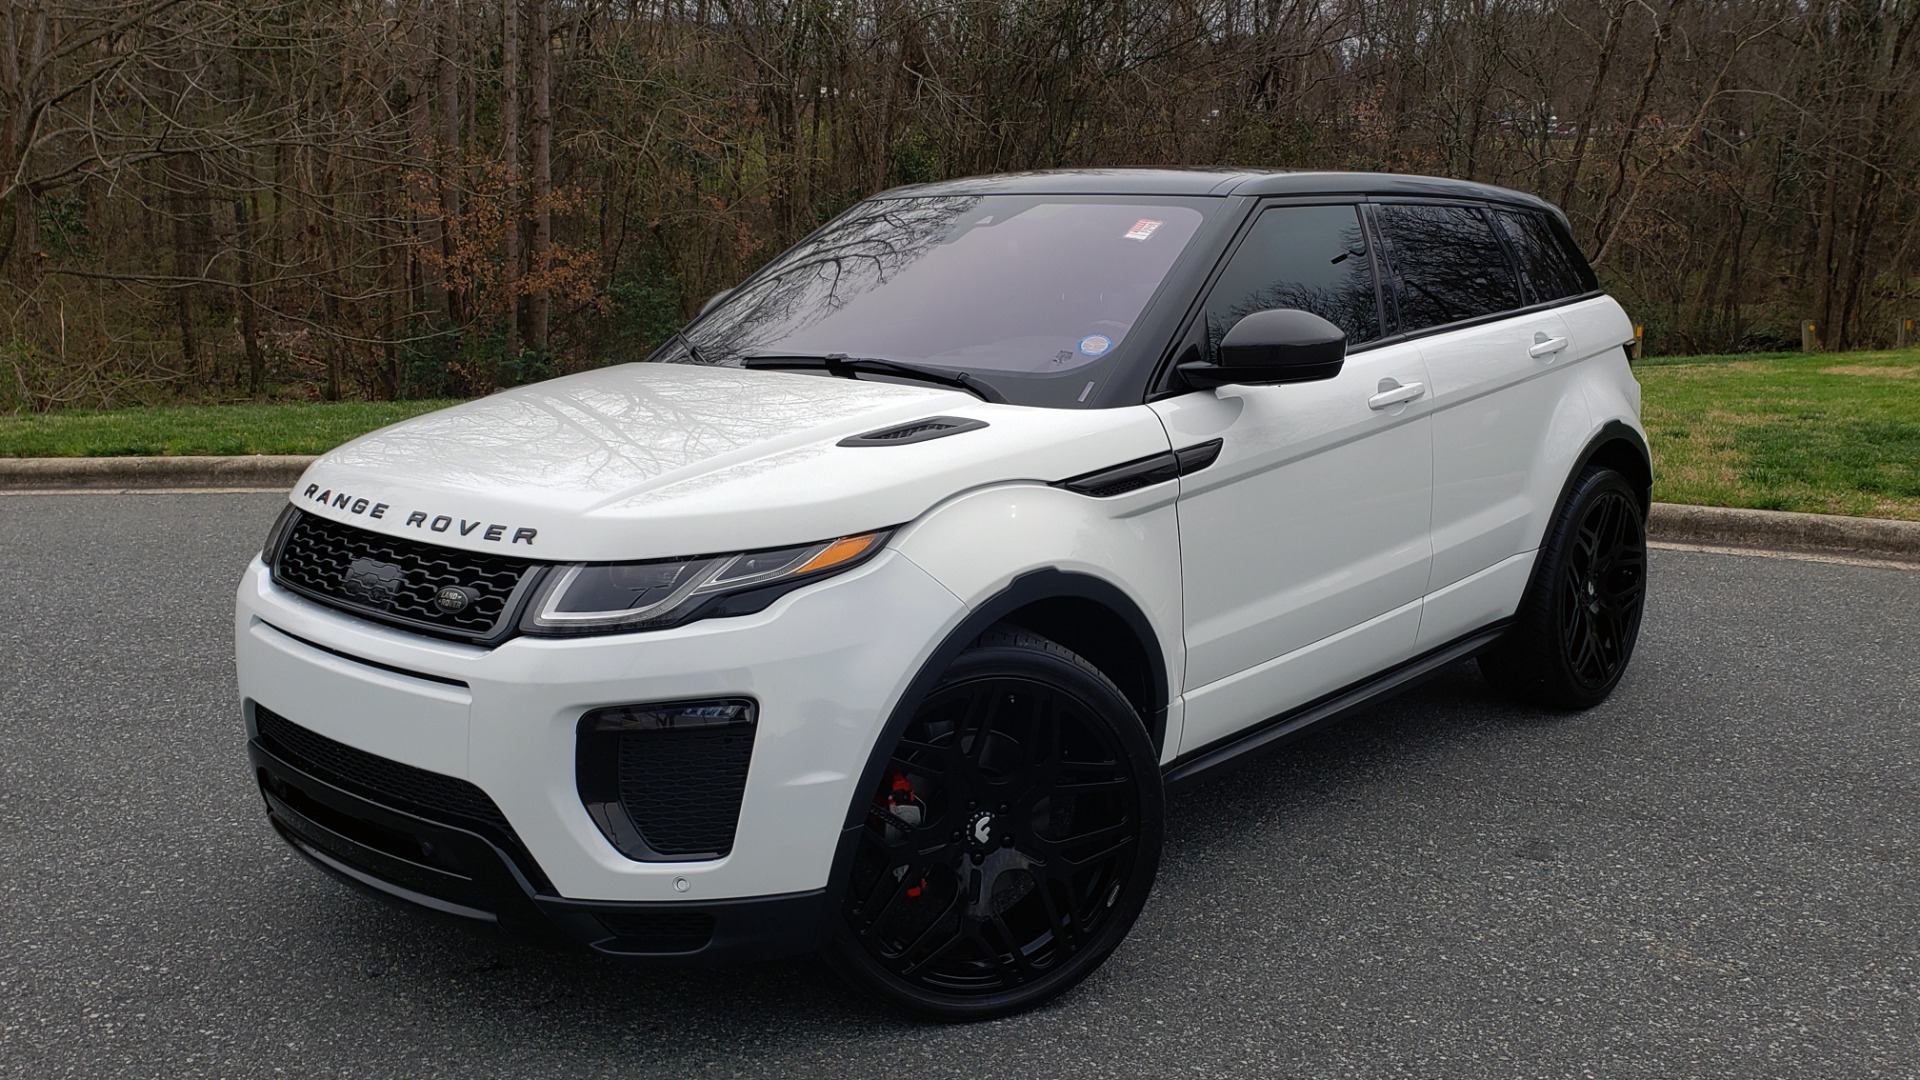 Used 2016 Land Rover RANGE ROVER EVOQUE HSE DYNAMIC / AWD / NAV / PANO-ROOF / REARVIEW / 22-IN WHEELS for sale Sold at Formula Imports in Charlotte NC 28227 1